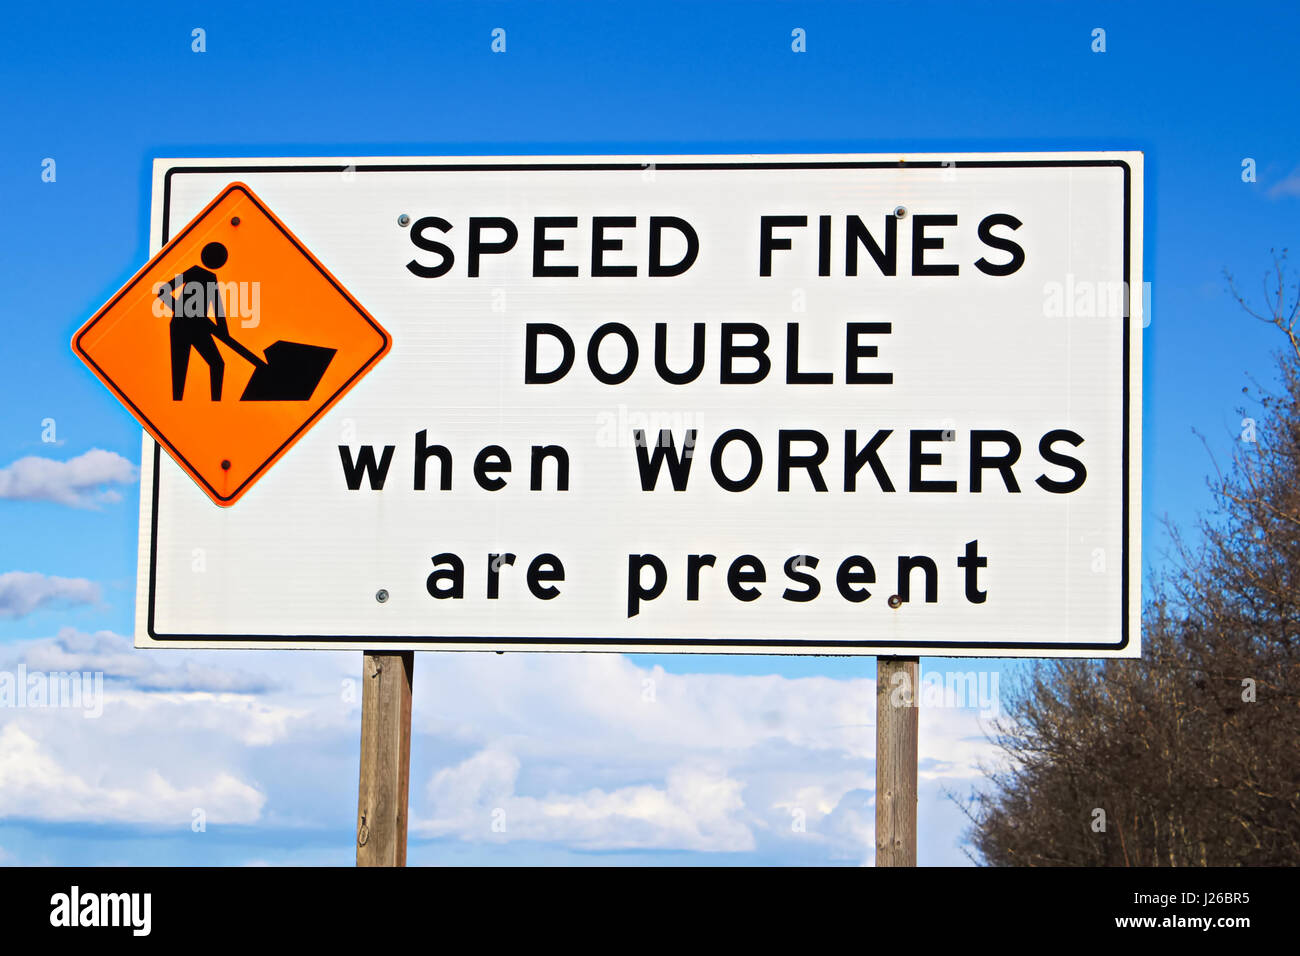 Speed fines double sign along highway. Stock Photo